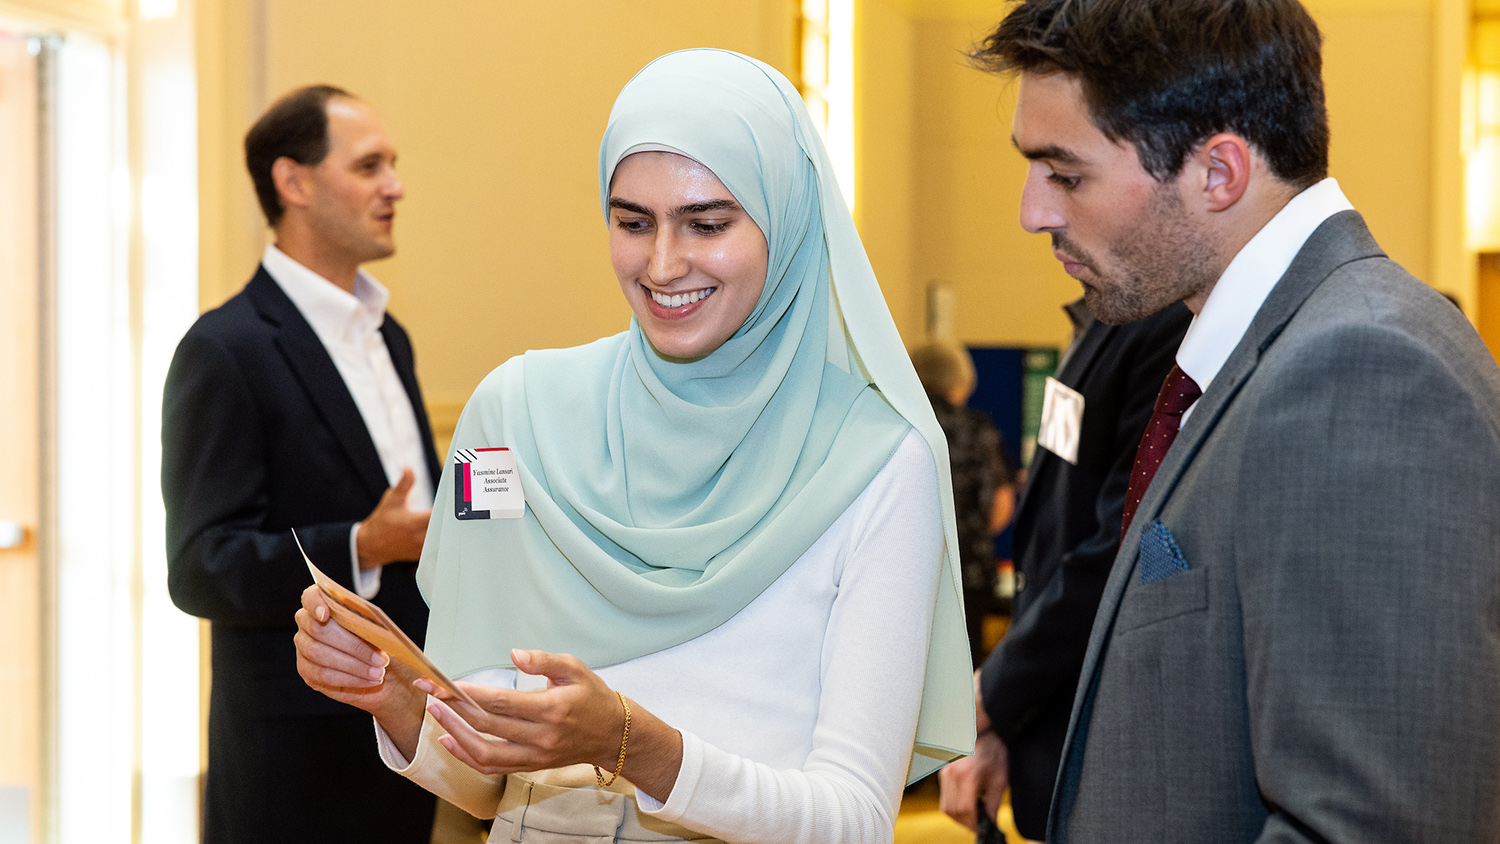 A Poole College student meets with recruiters at a job fair.